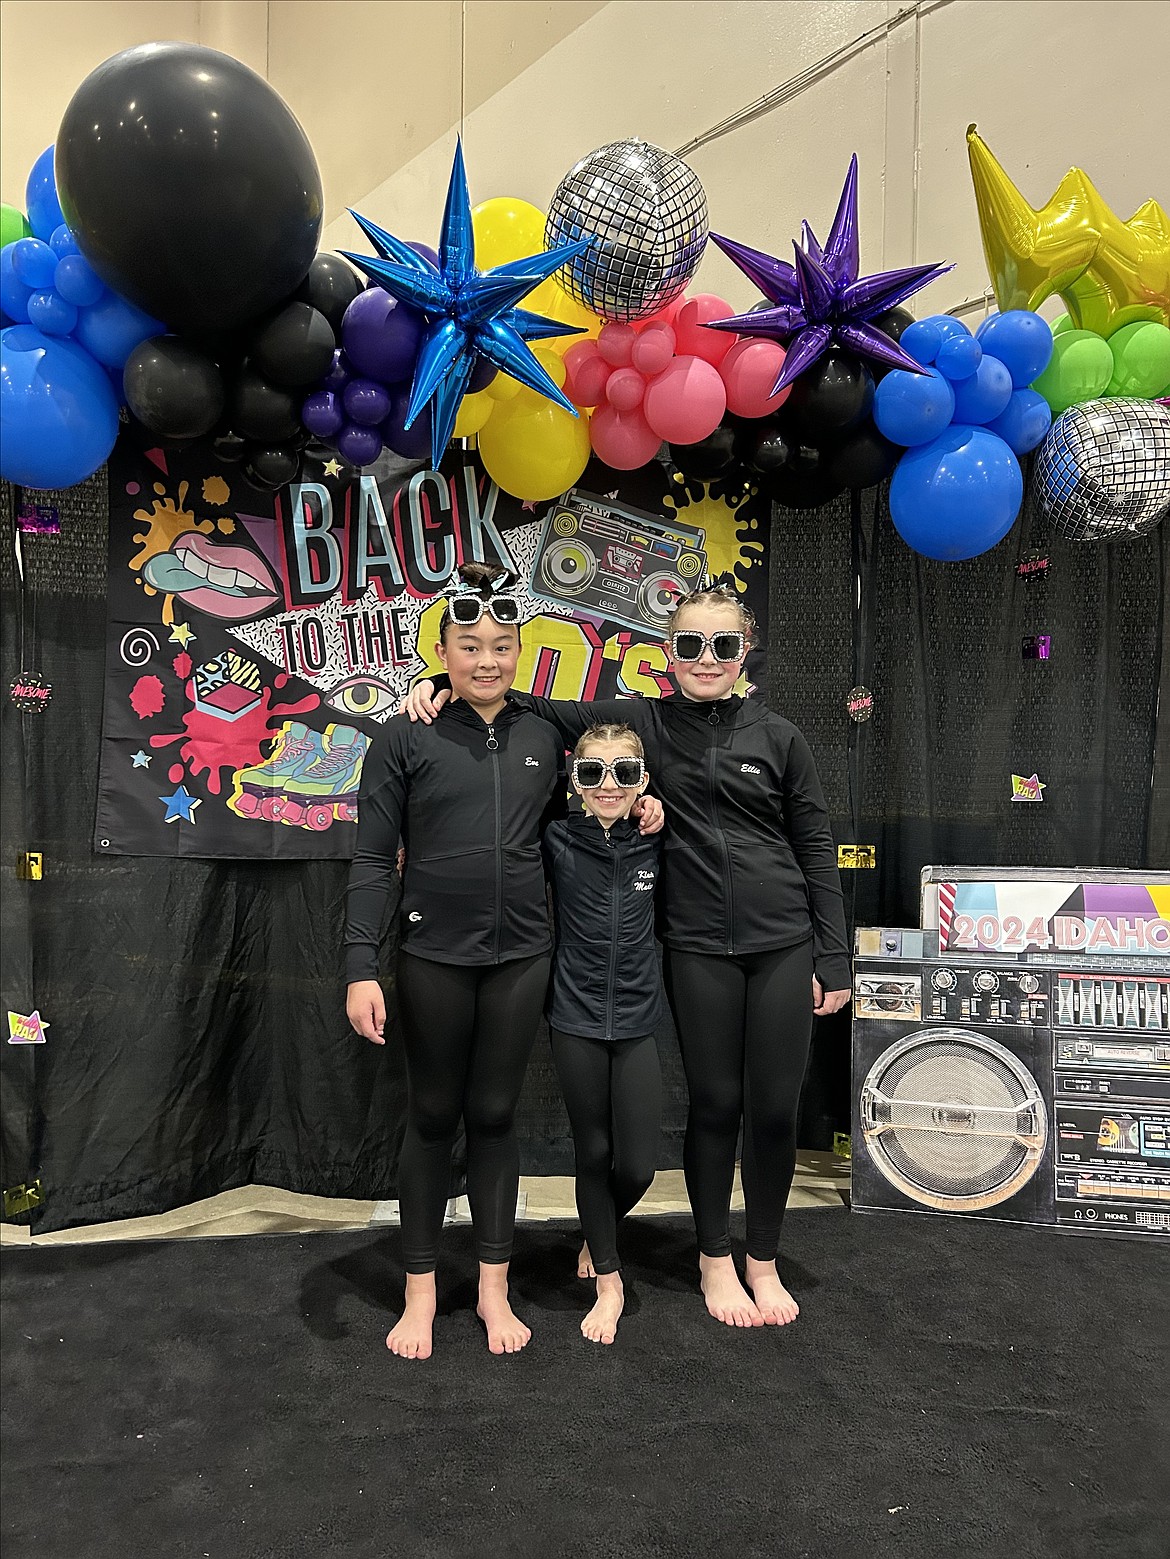 Courtesy photo
Avant Coeur Gymnastics Xcel Gold Child team at the Idaho State Xcel Championships in Boise. From left are Evelynn Prescott, Klair Madsen and Ellie Anderson.